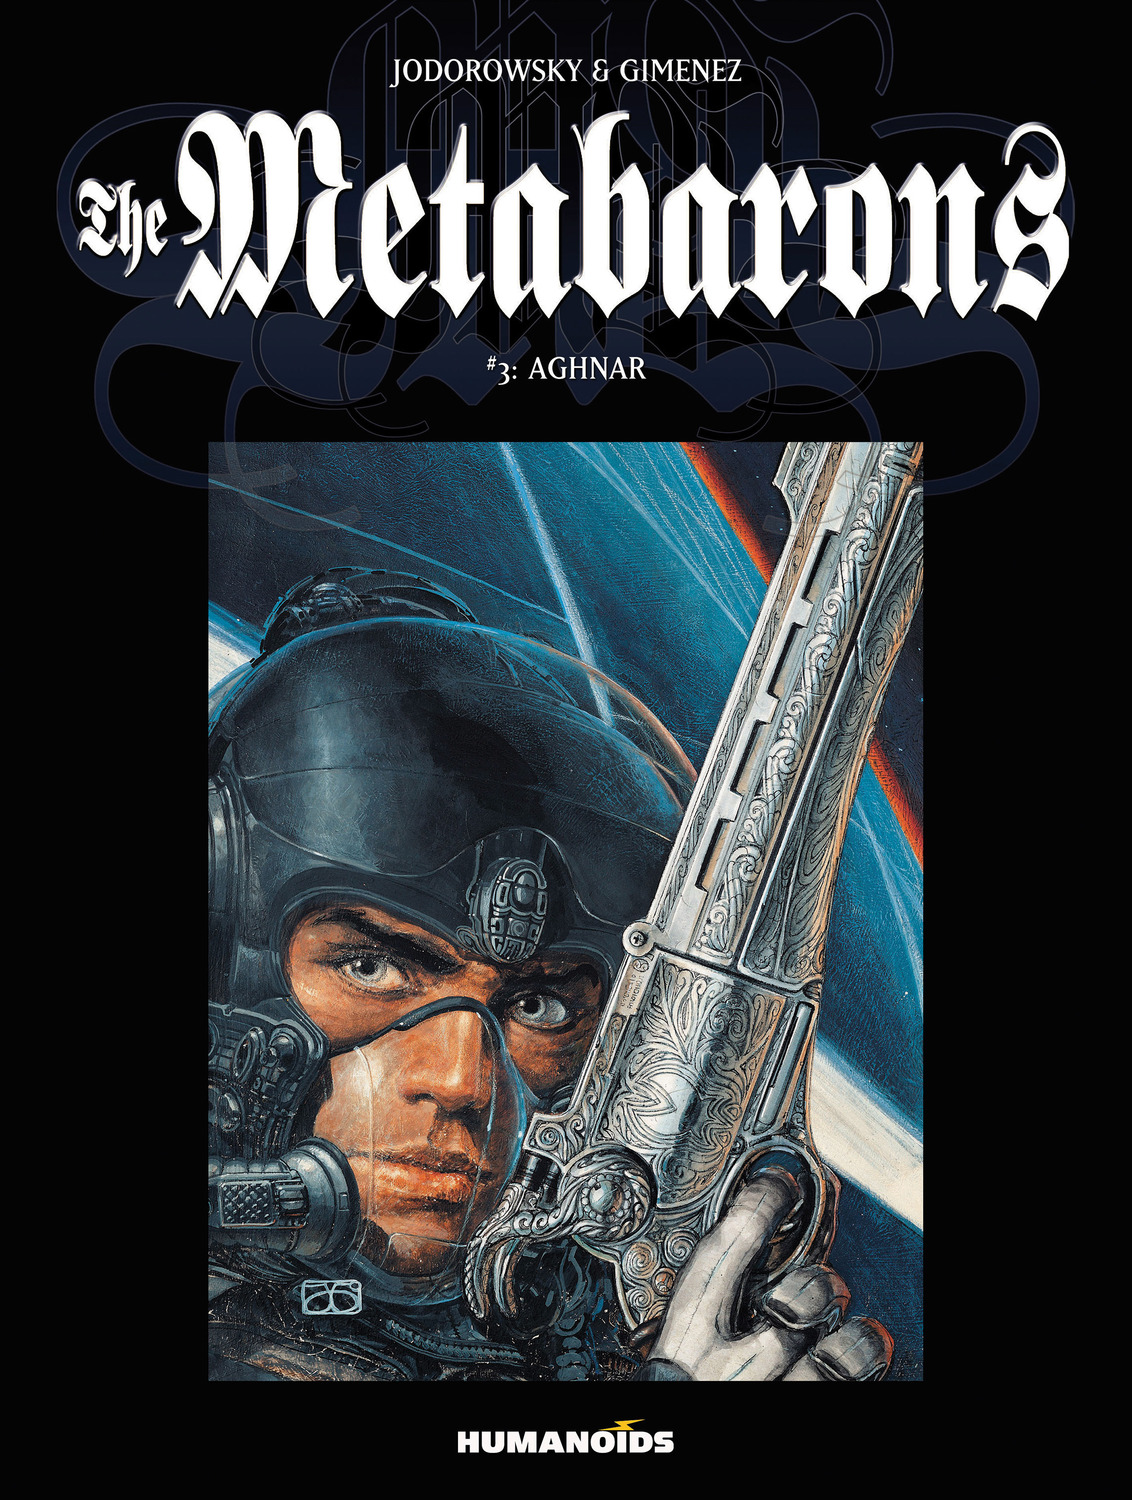 THE_METABARONS_V3_ID444_0_11167_zoomed.jpg